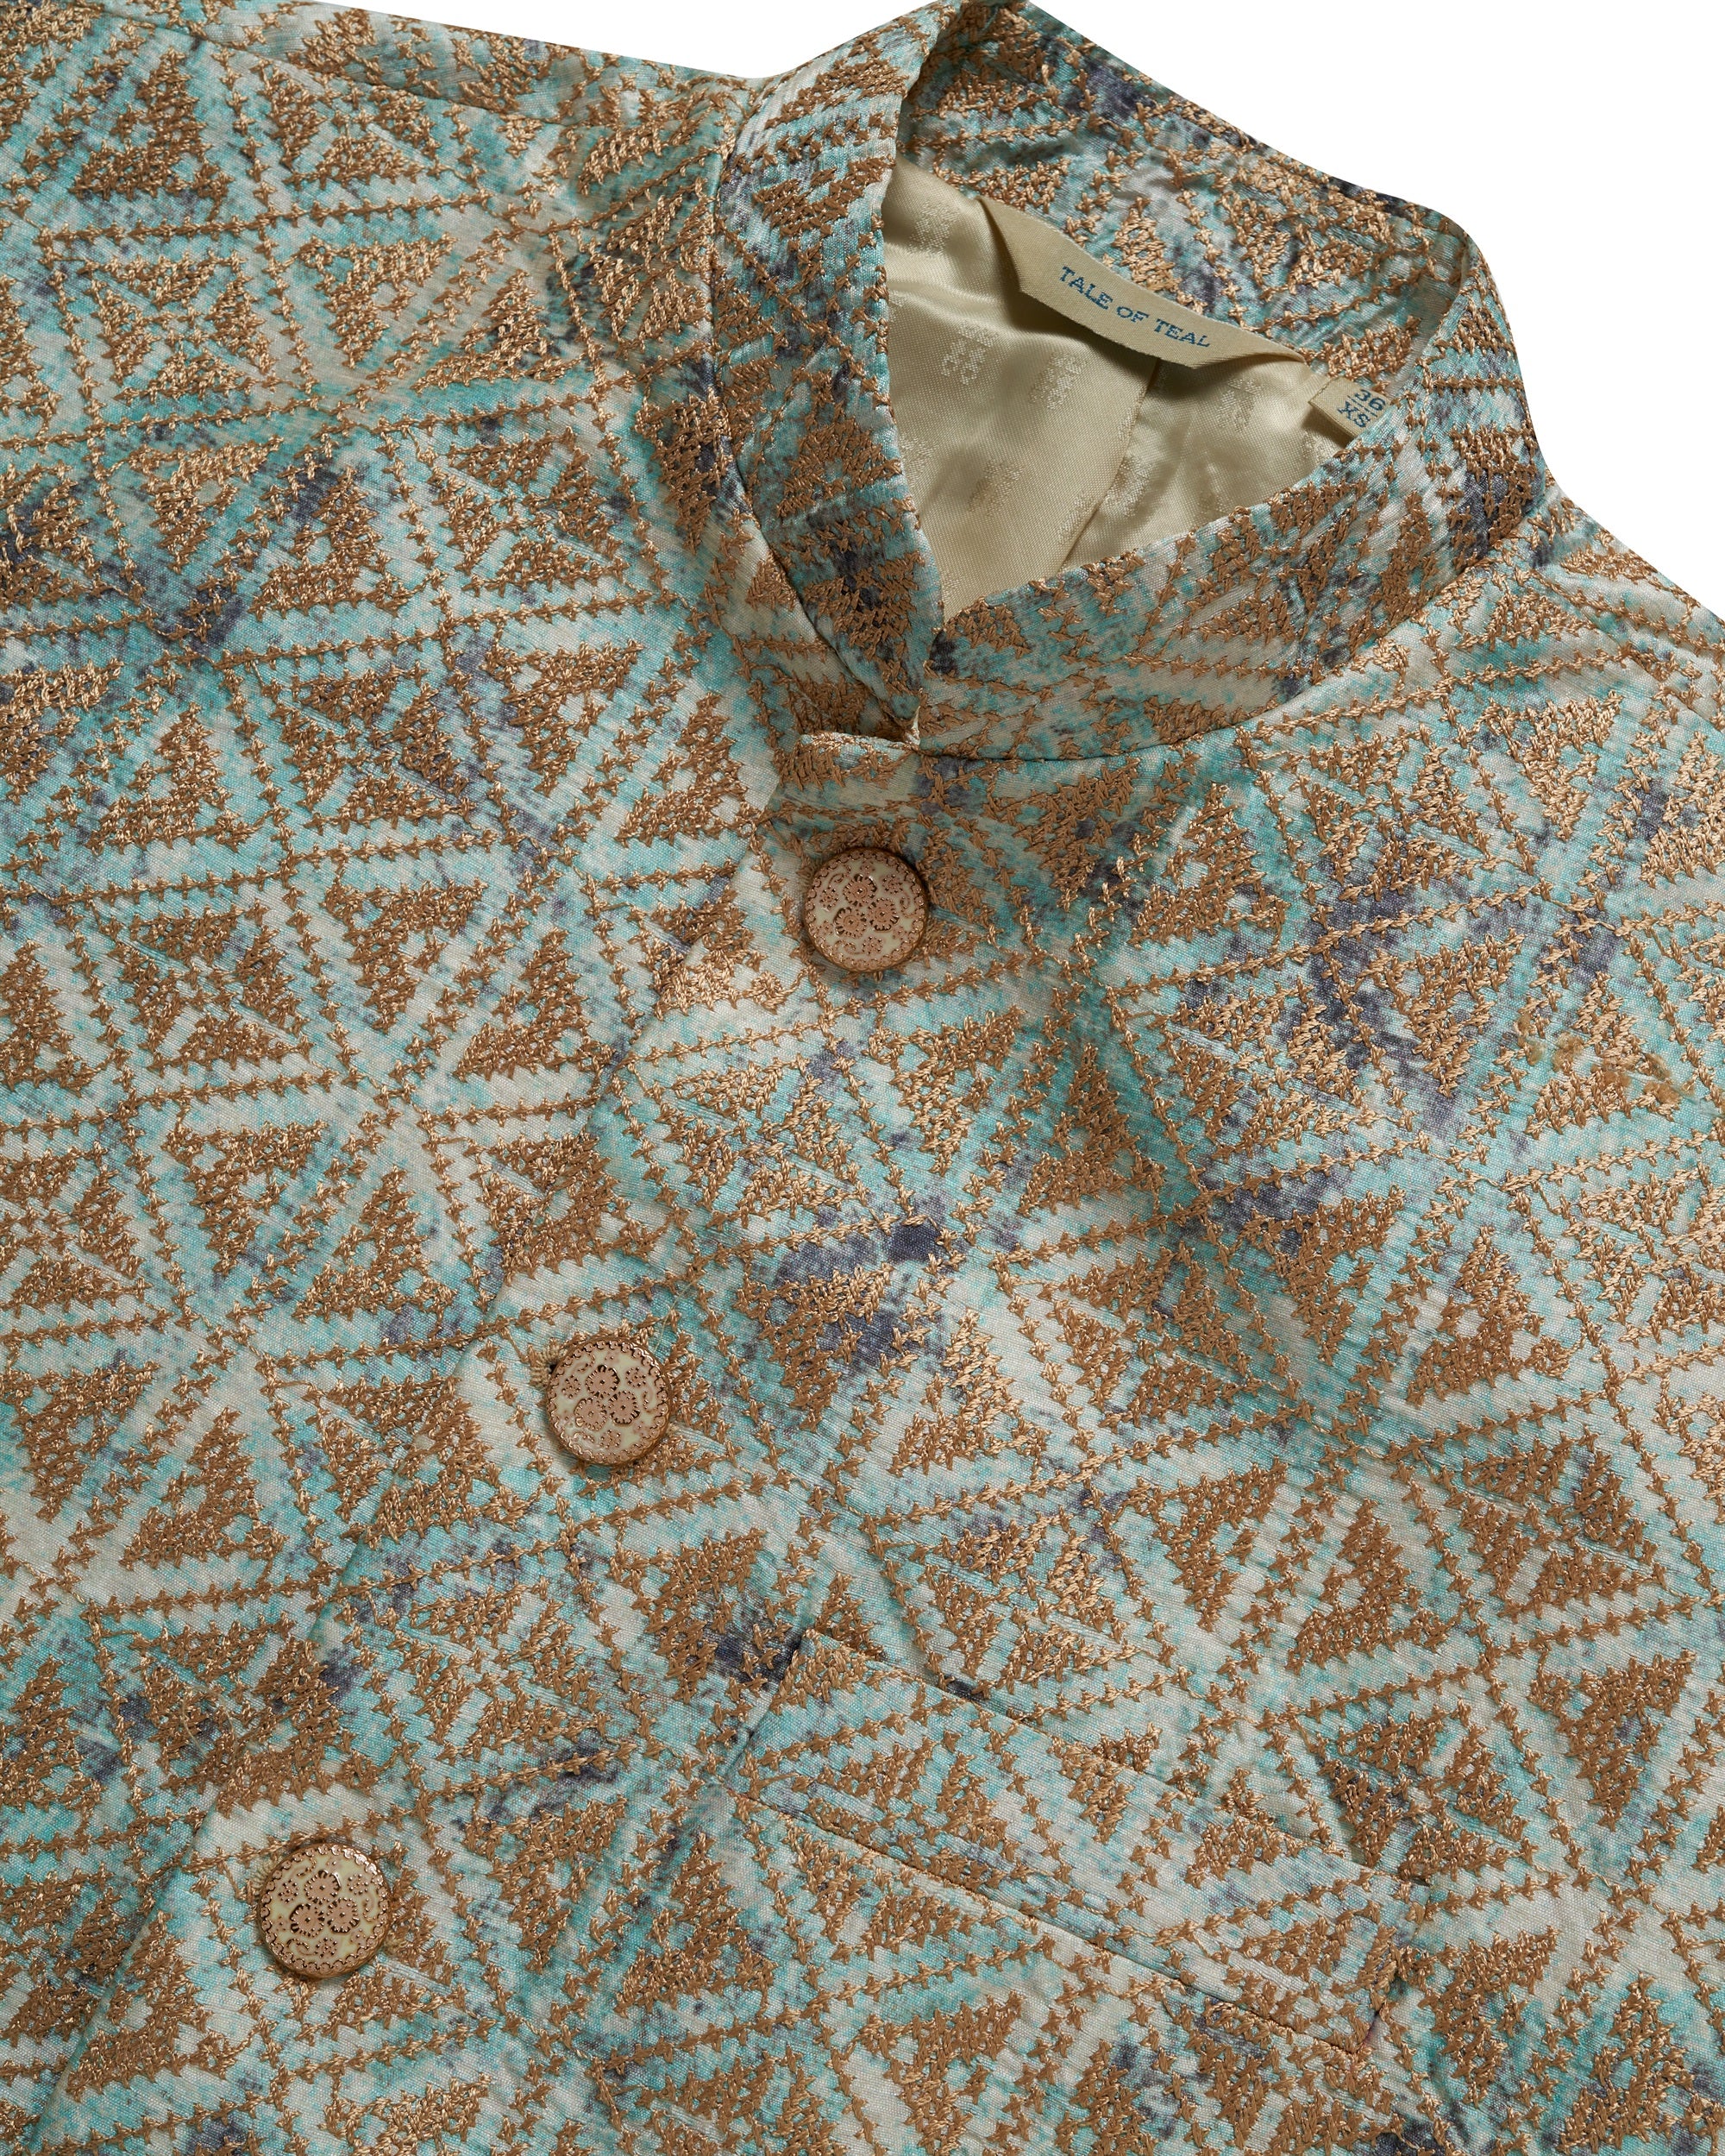 Tale of Teal Allover Patterned Thread Embroidered Bundi Ethnic Waistcoat - Light Blue